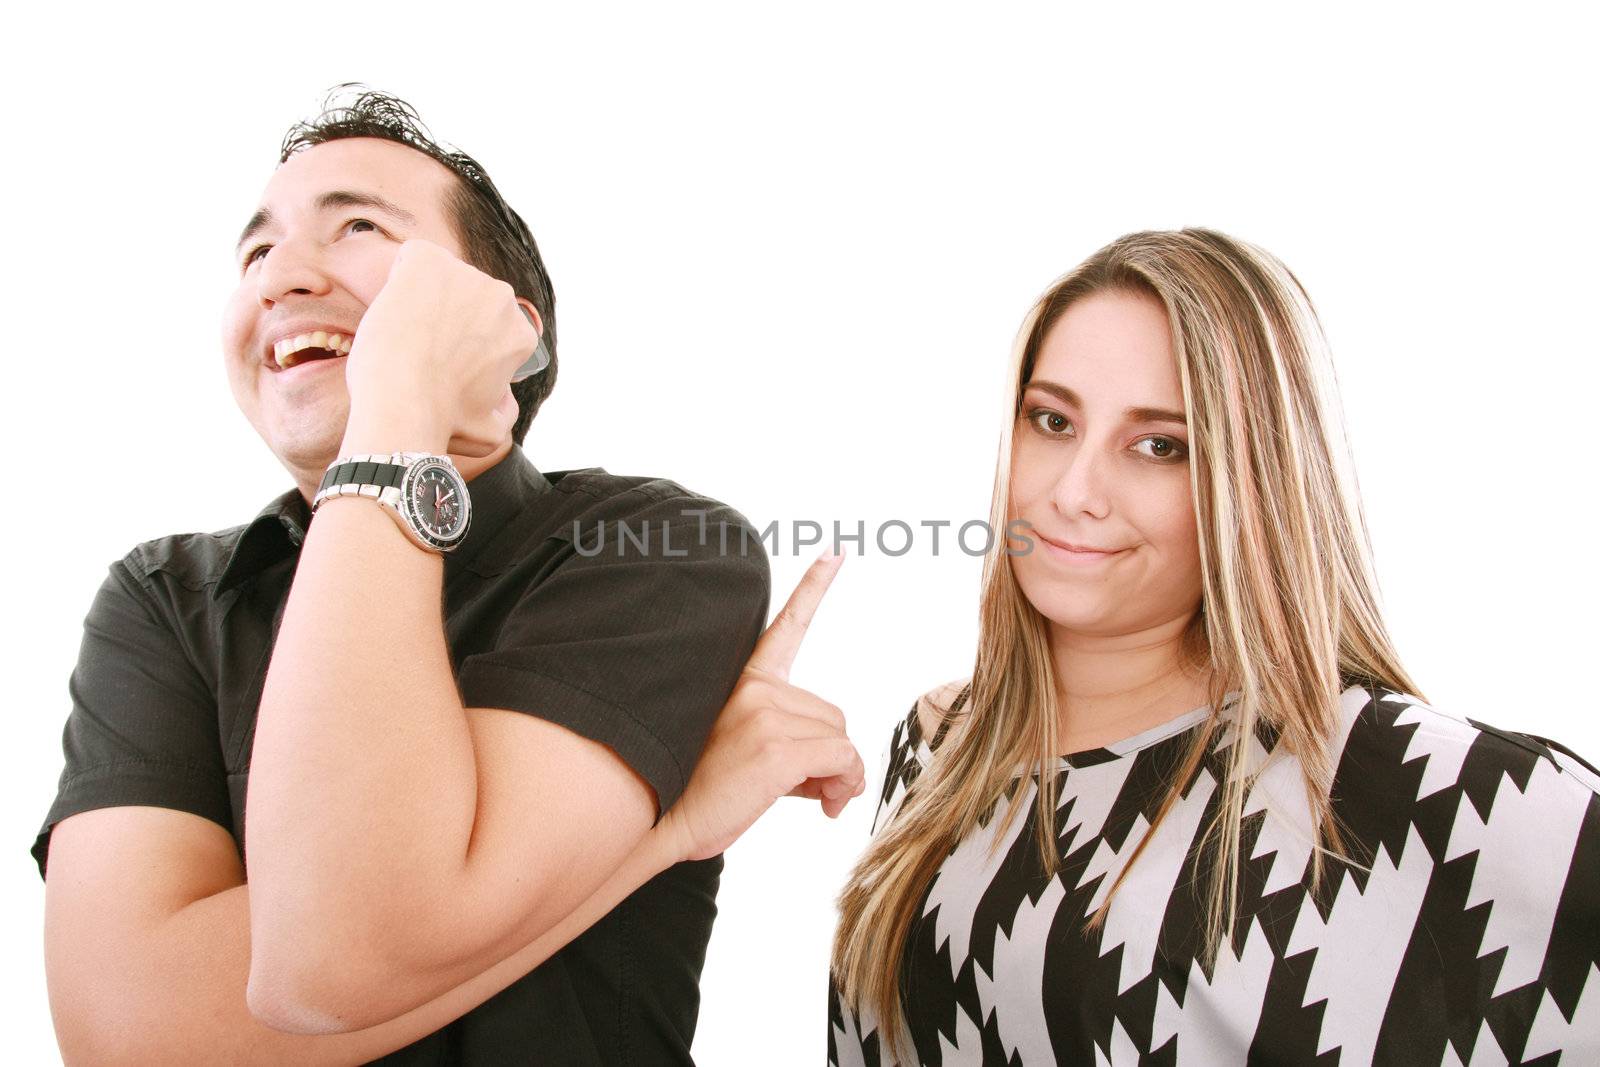 A woman not happy with what her boyfriend is laughing about on his phone.